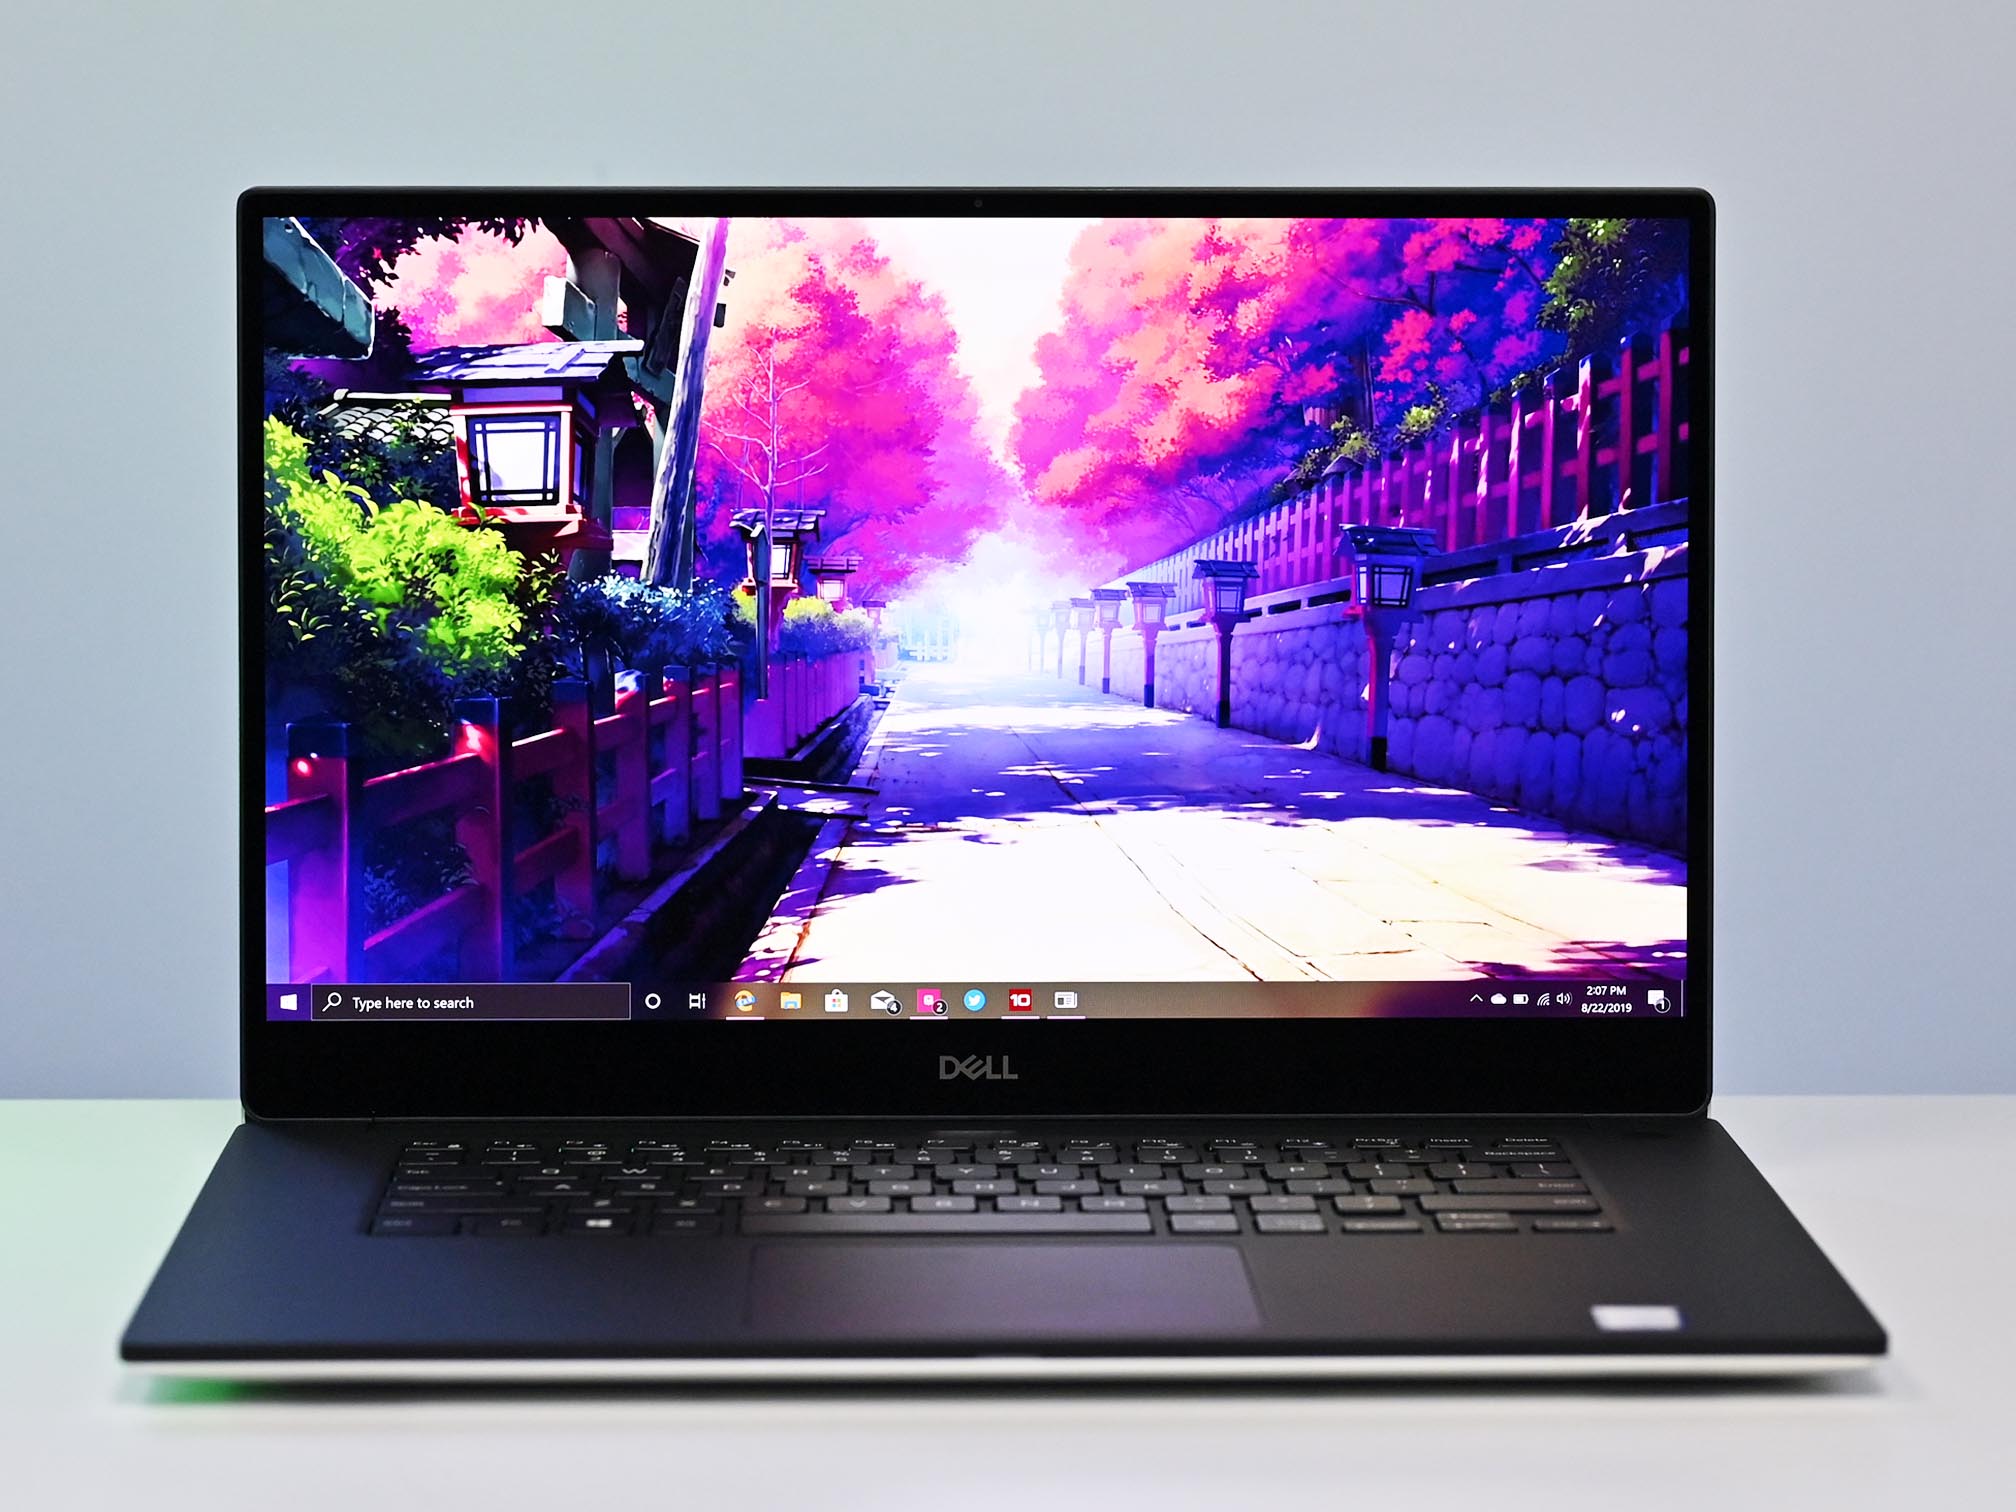 Dell Xps 15 7590 Review The King Of 15 Inch Laptops Retains Its Crown Windows Central